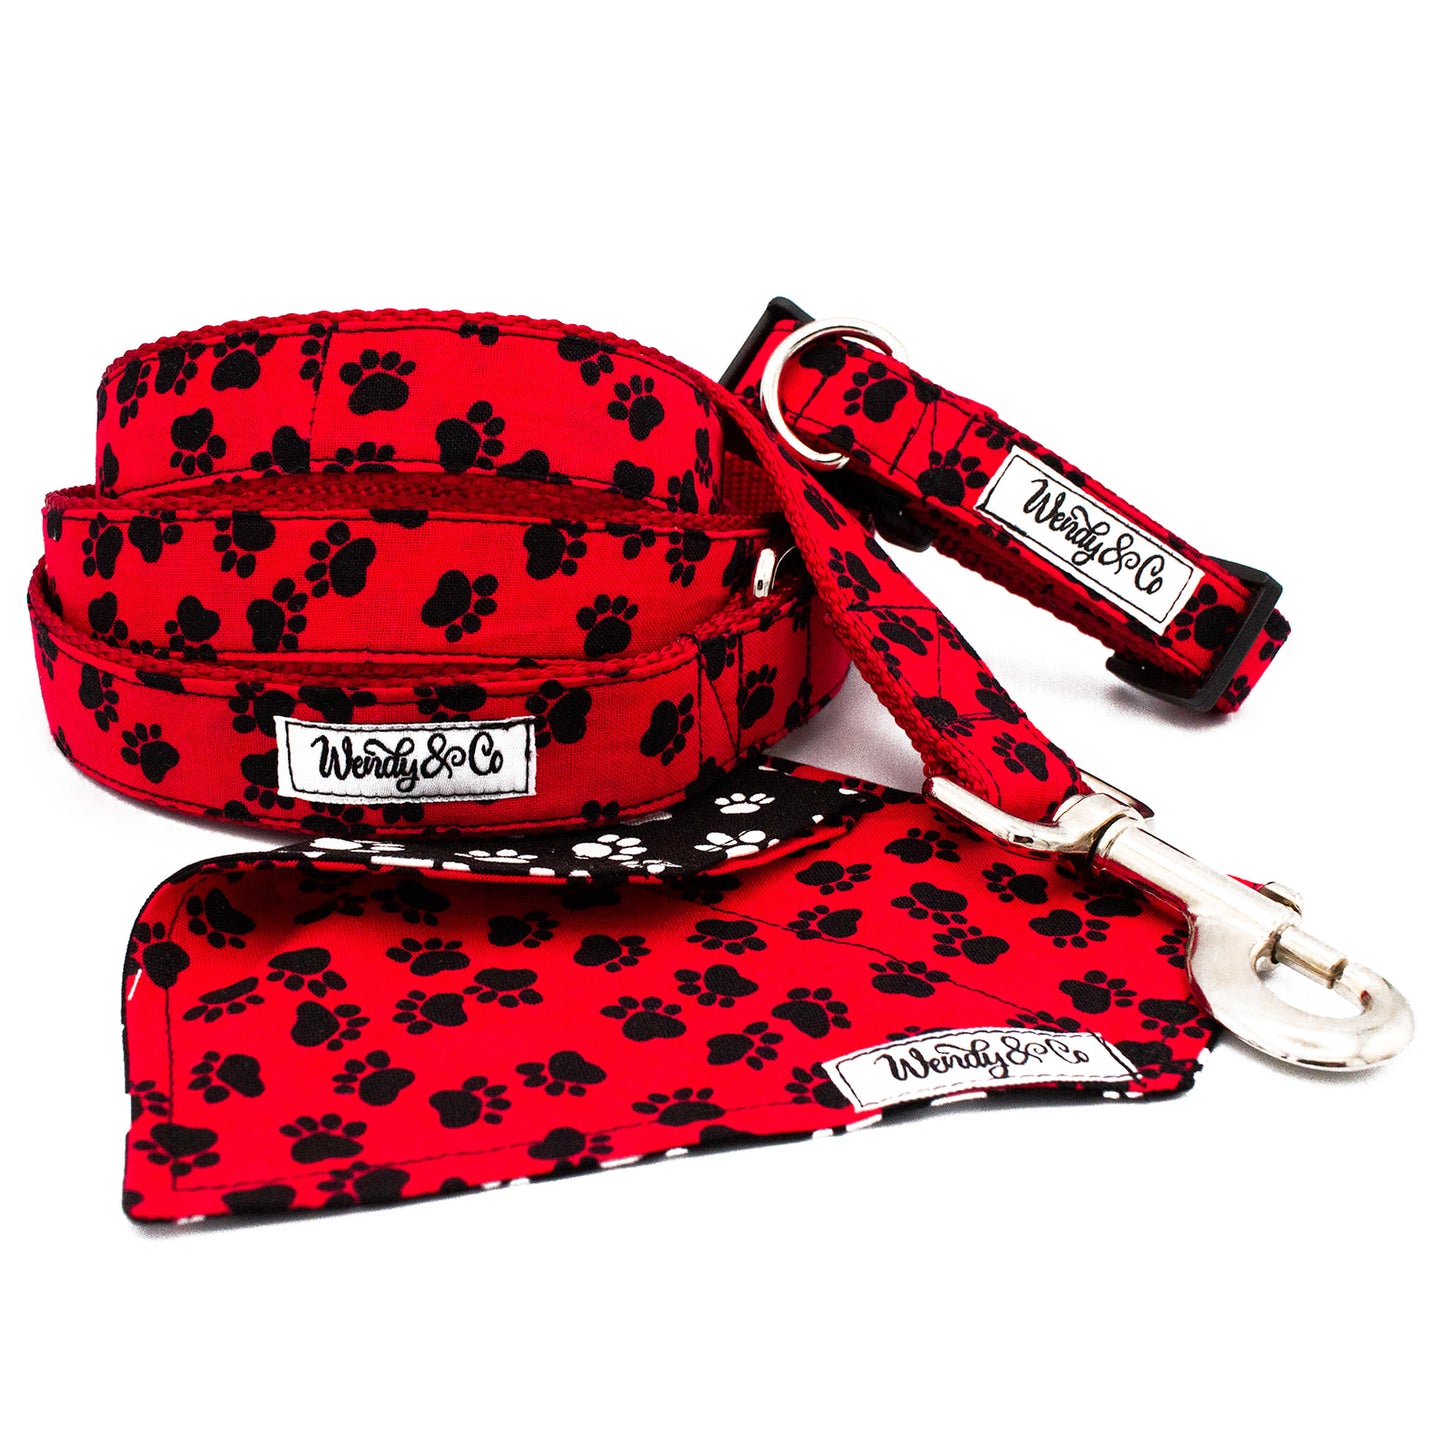 Red webbing covered with red with black paws dog collar, leash and bandana.